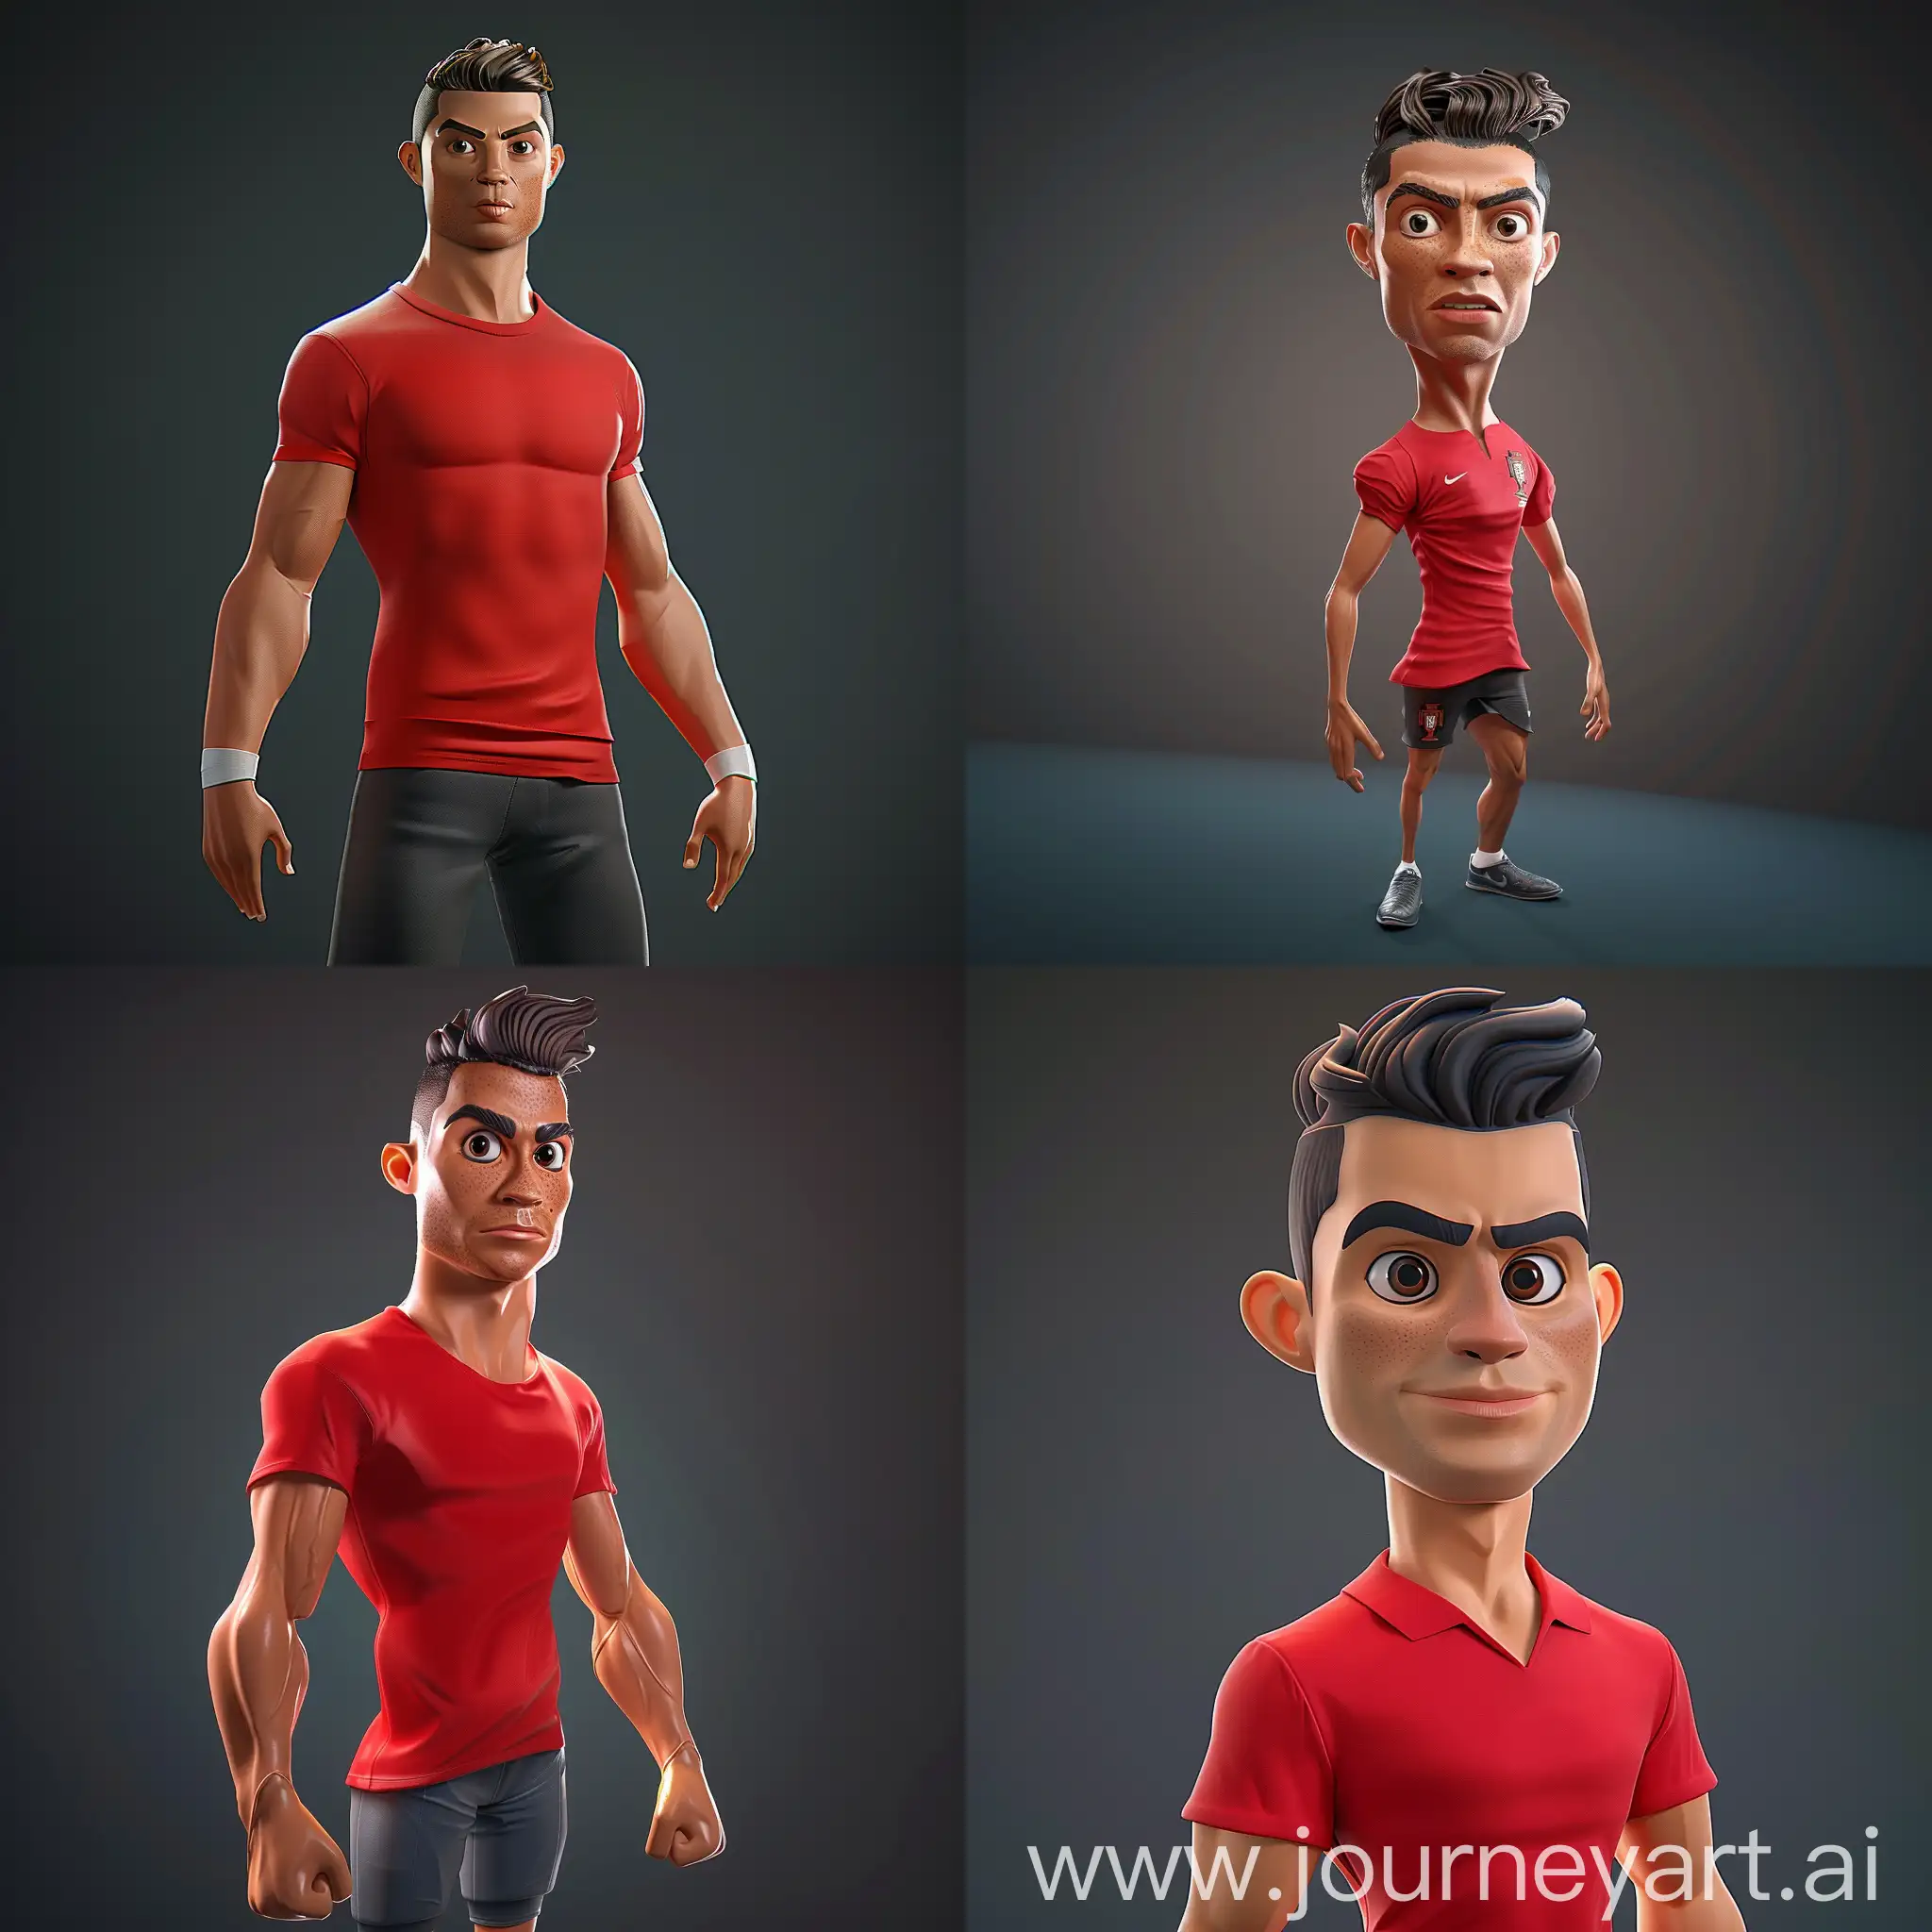 Full Body Cartoonic Character of Cristiano Ronaldo With Red T-shirt in 3d Style, 3d Render, Dark Background, Blender Software, High Quality